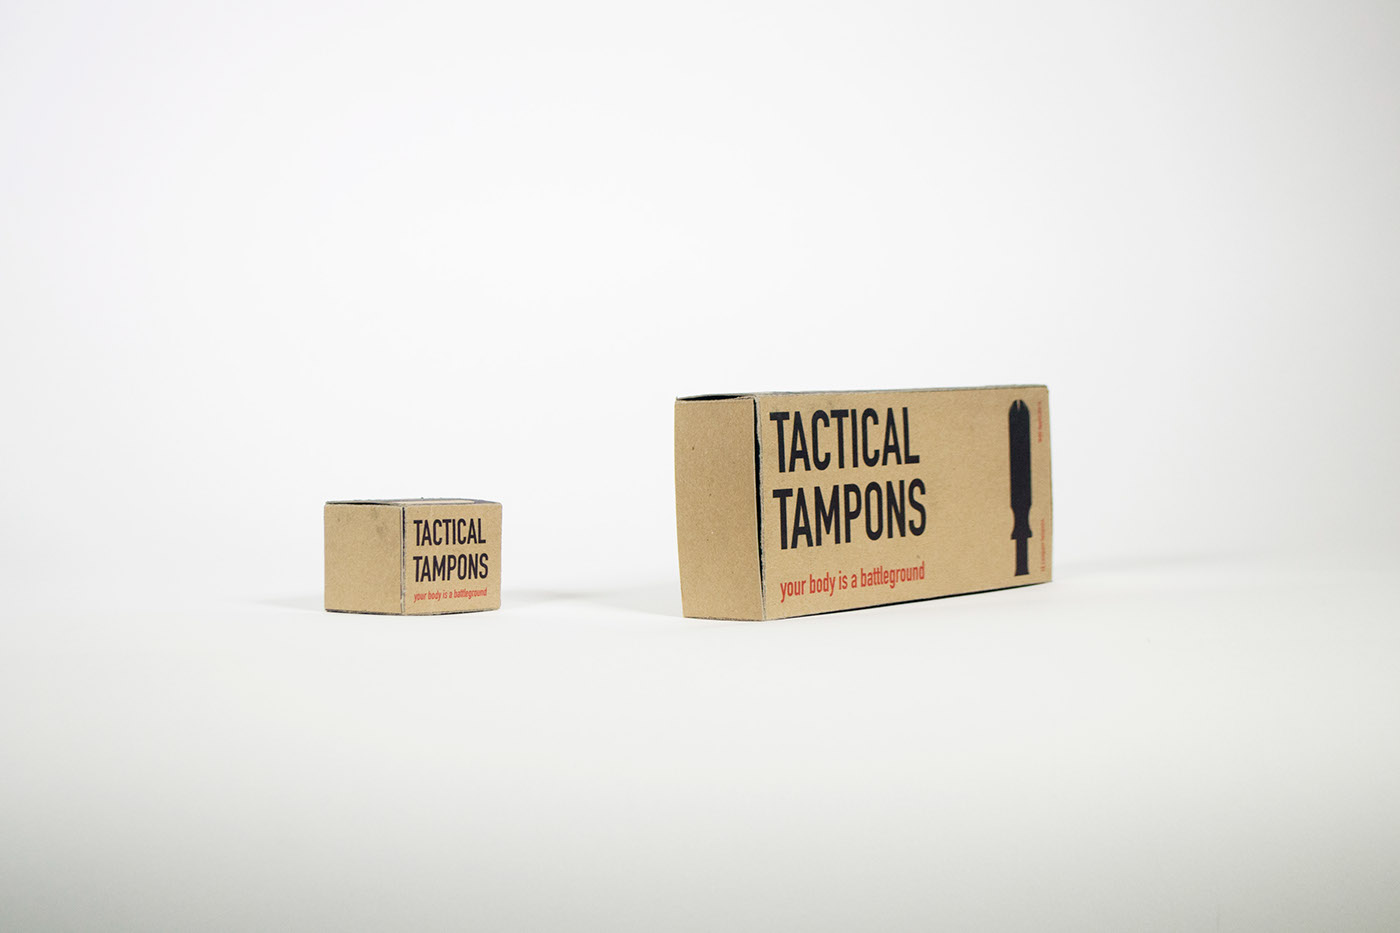 tampon feminism packagin Bullets force connection branding 